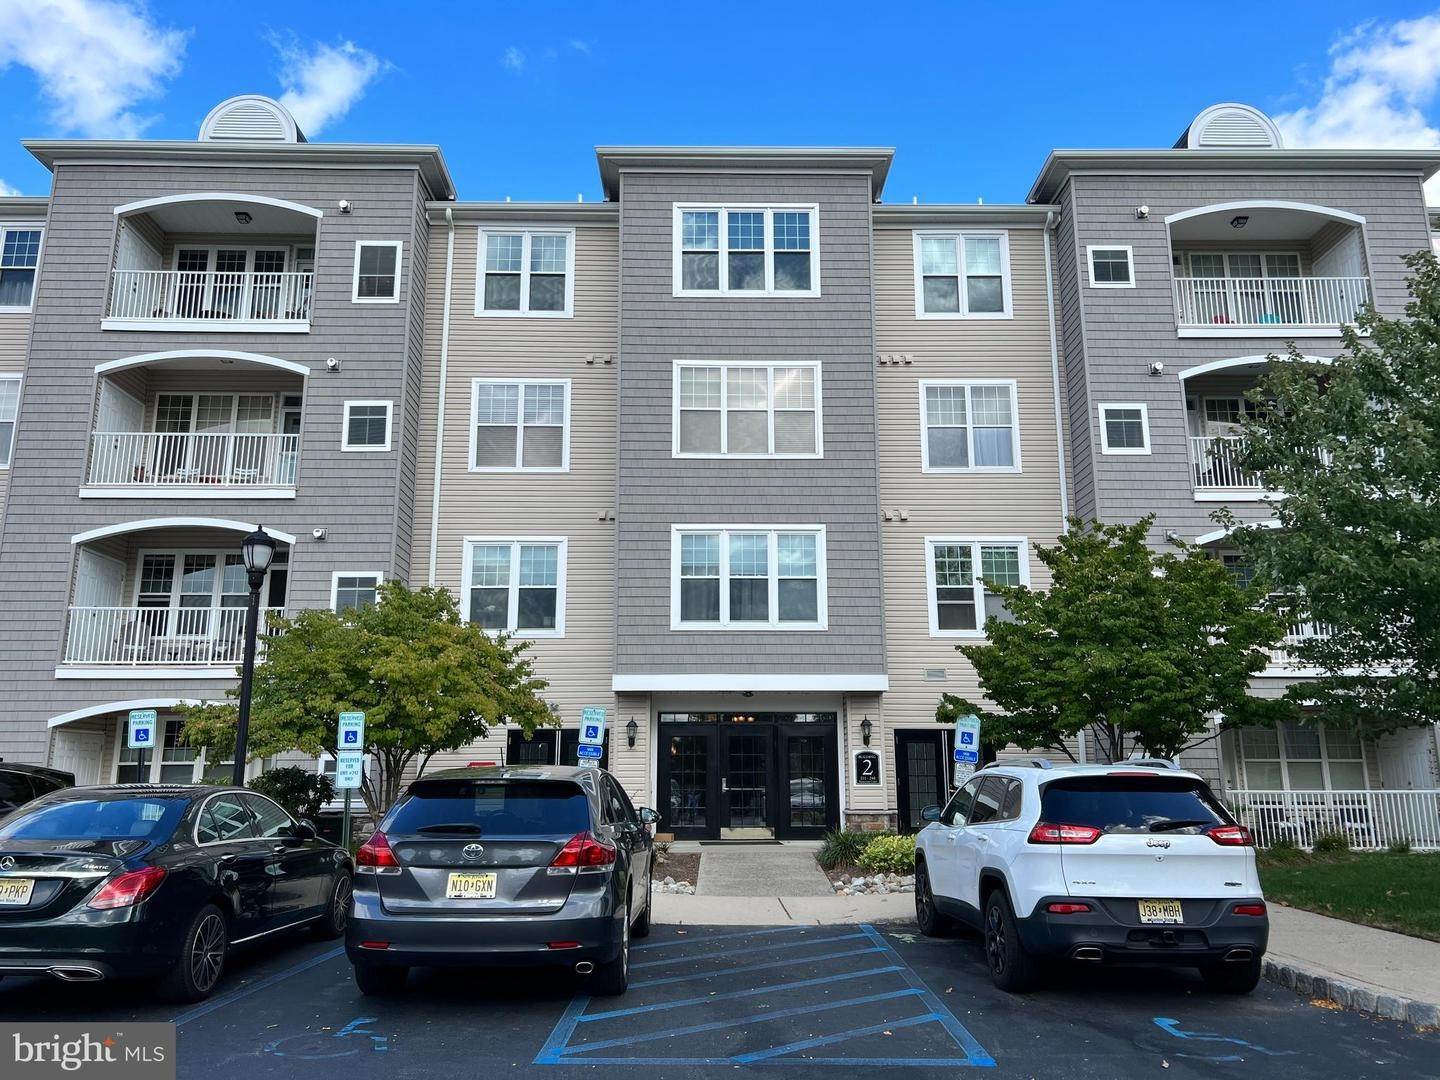 Apartments at 244 MASTERSON Ewing, New Jersey 08618 United States